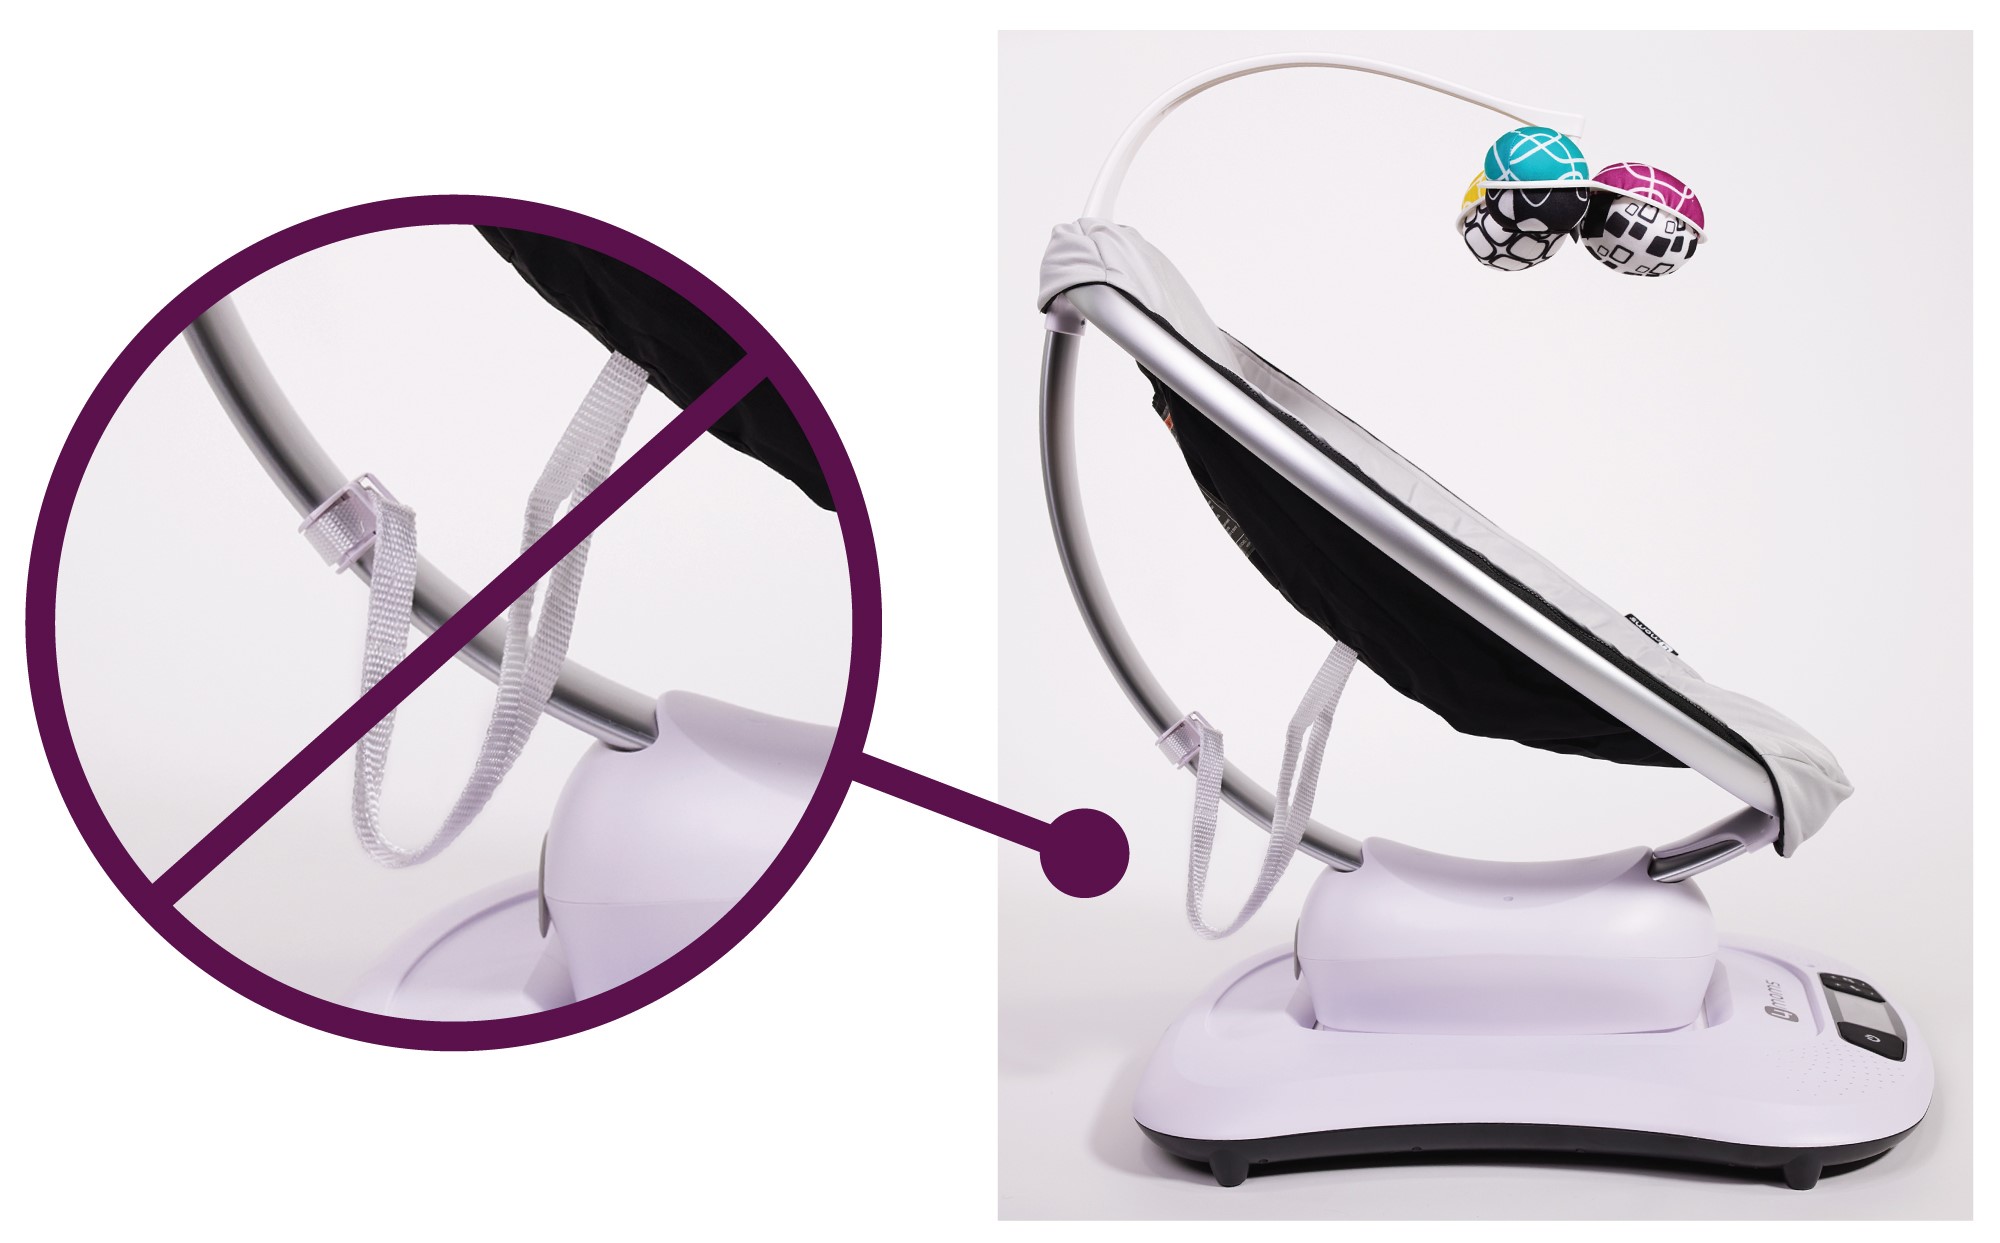 Strap dangling from recalled 4moms MamaRoo swing